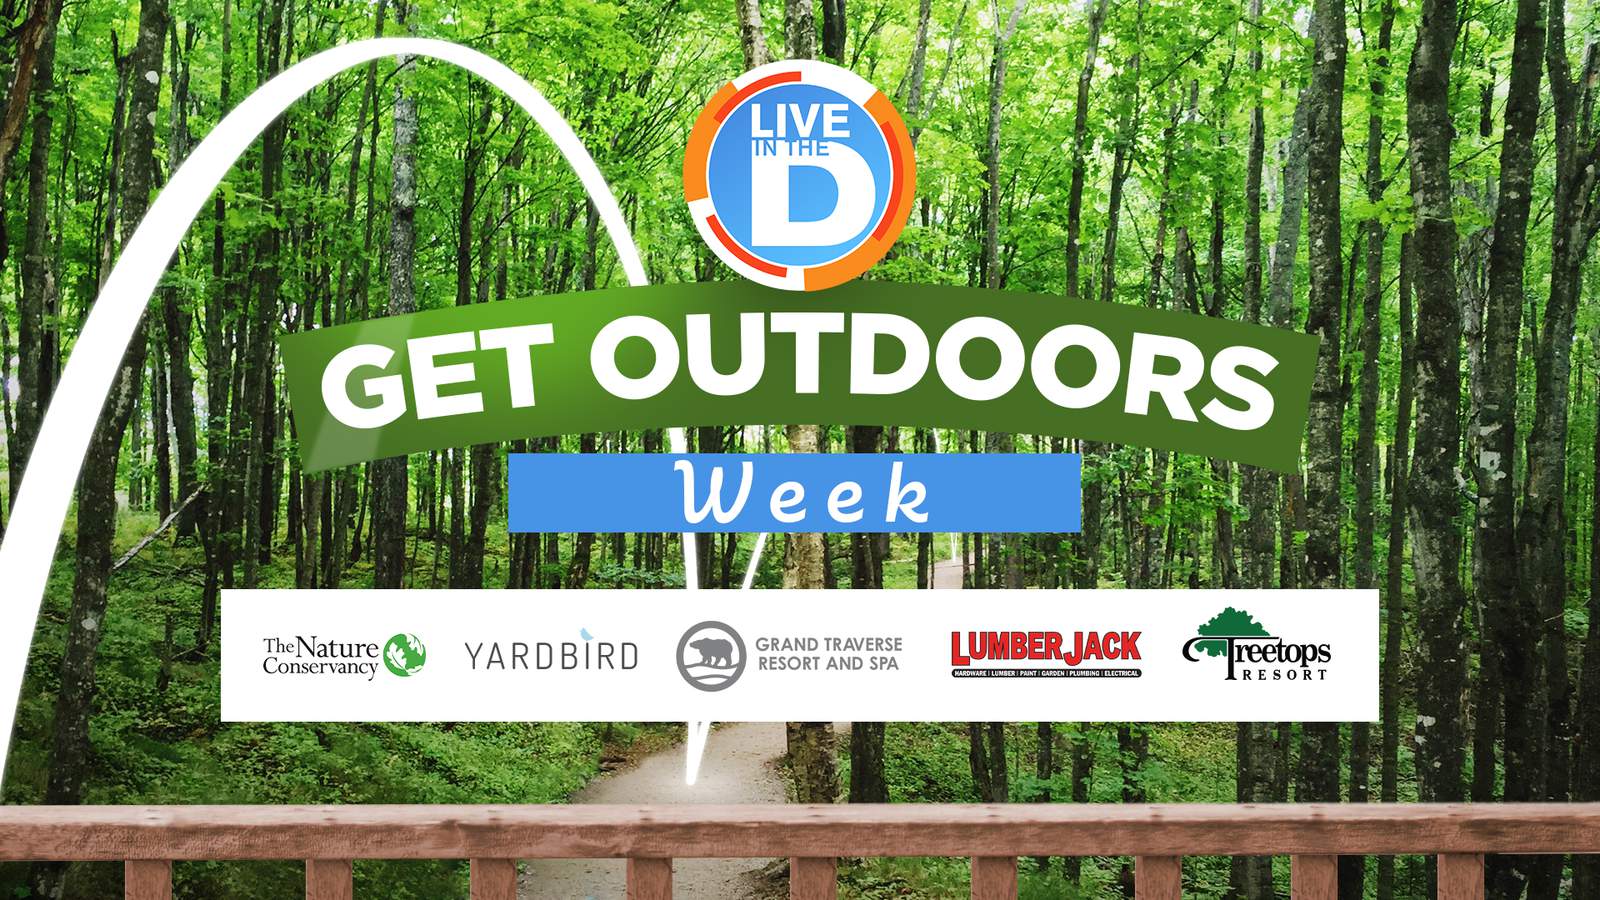 Live In The D Get Outdoors Contest